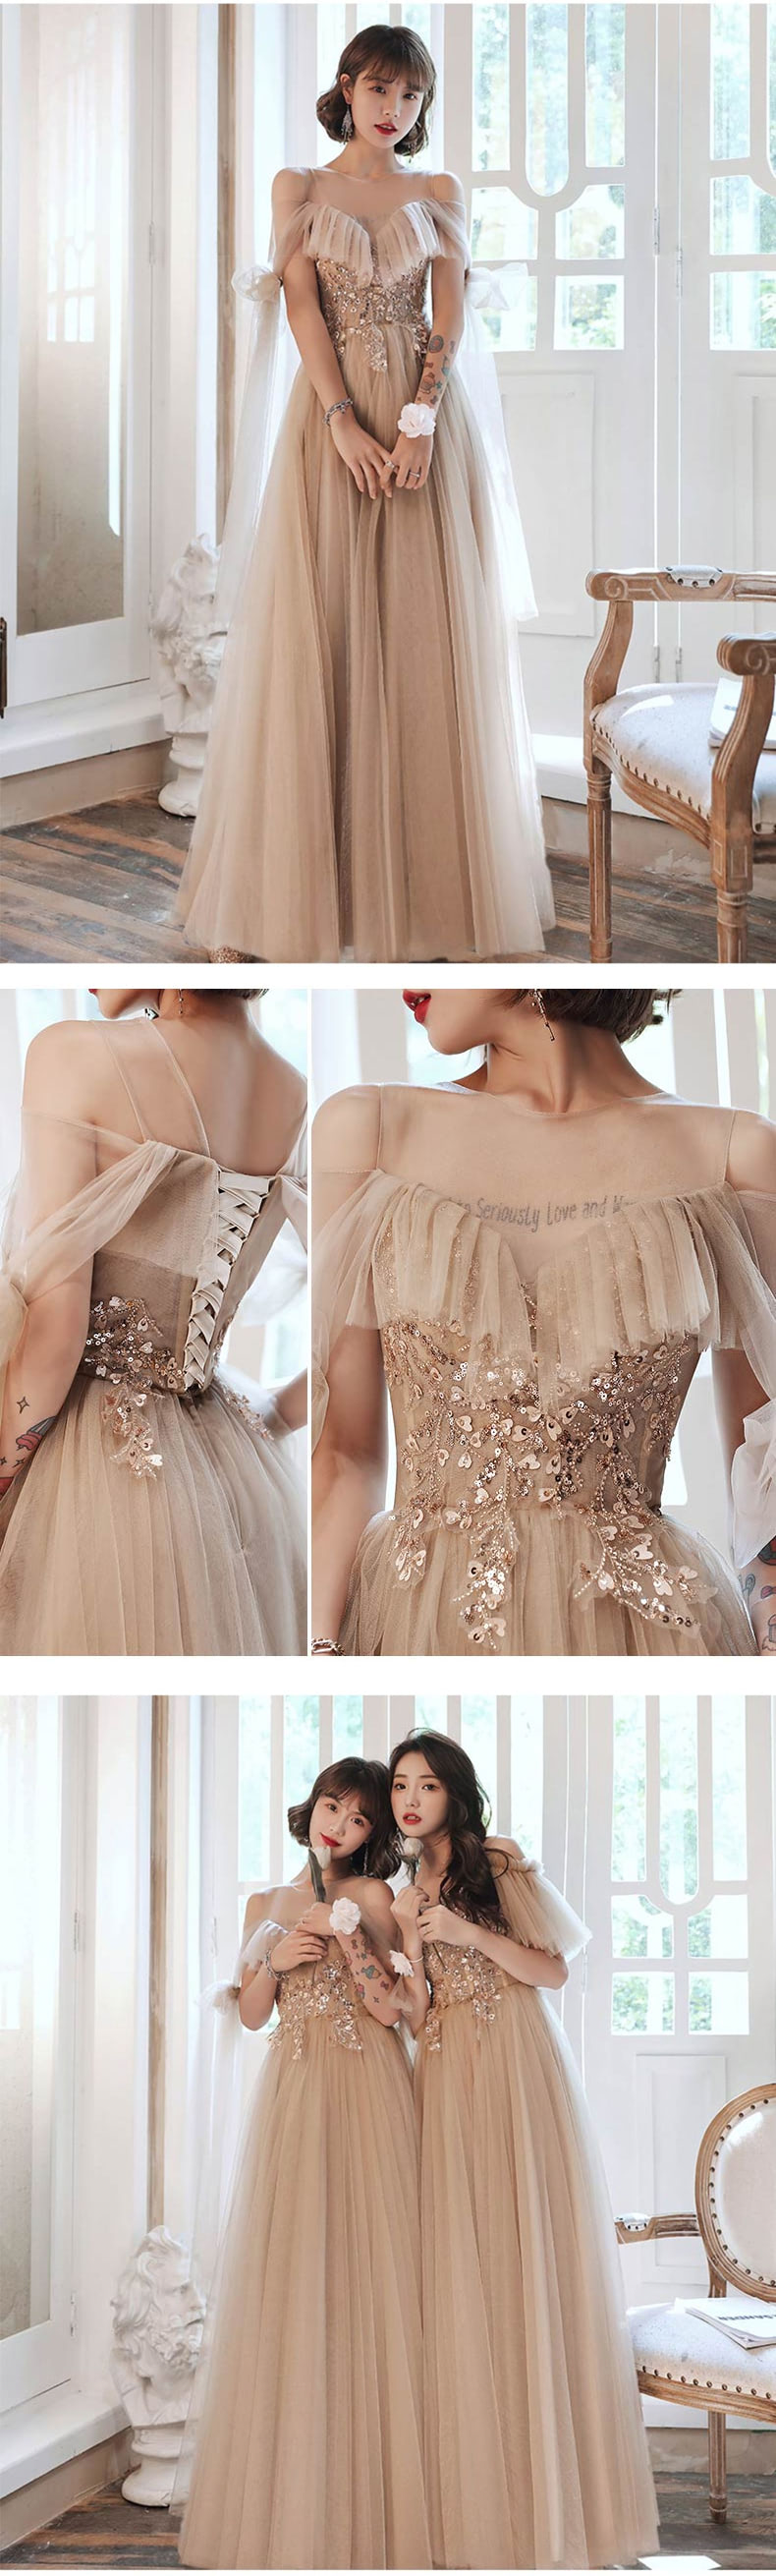 Charming-Embroidery-Ruffle-Lace-Long-Bridesmaid-Dress-Ball-Gown21.jpg